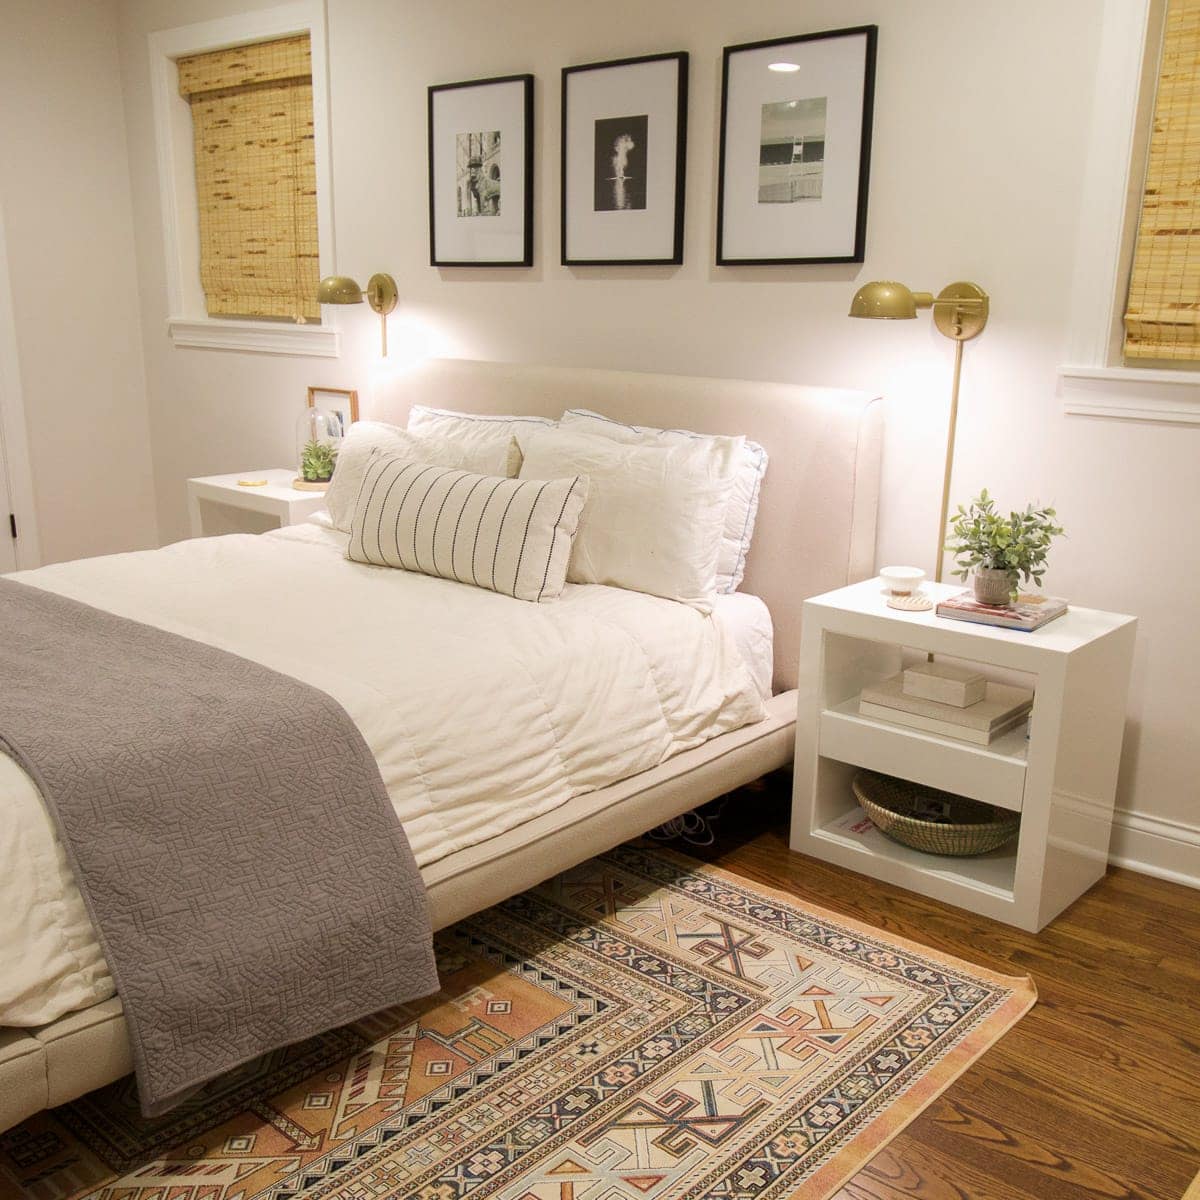 Easy bedroom DIY projects to tackle this weekend